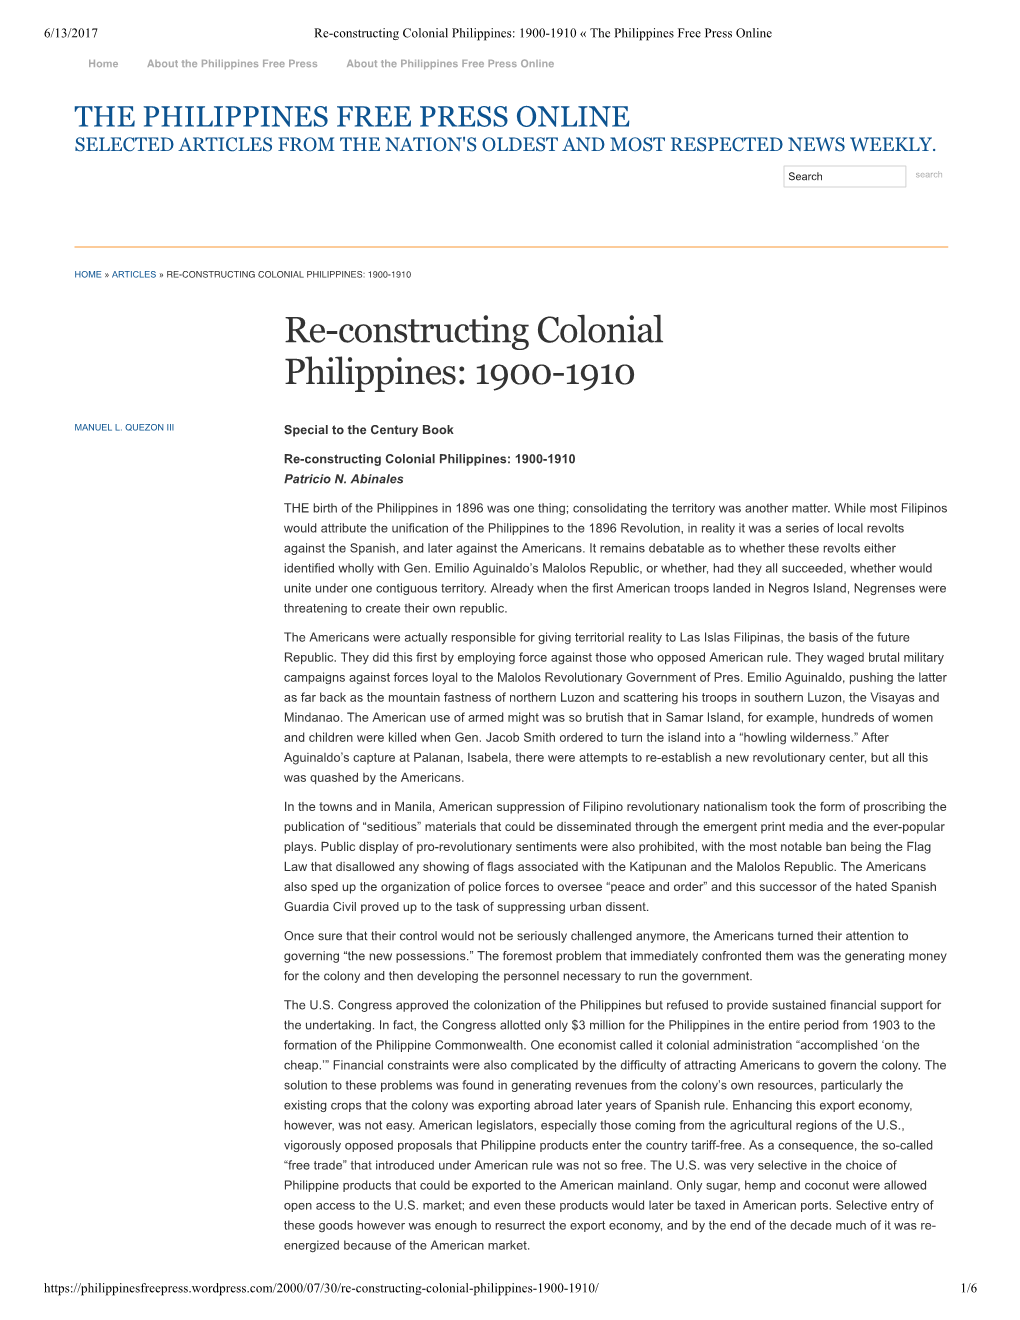 Re-Constructing Colonial Philippines: 1900-1910 « the Philippines Free Press Online